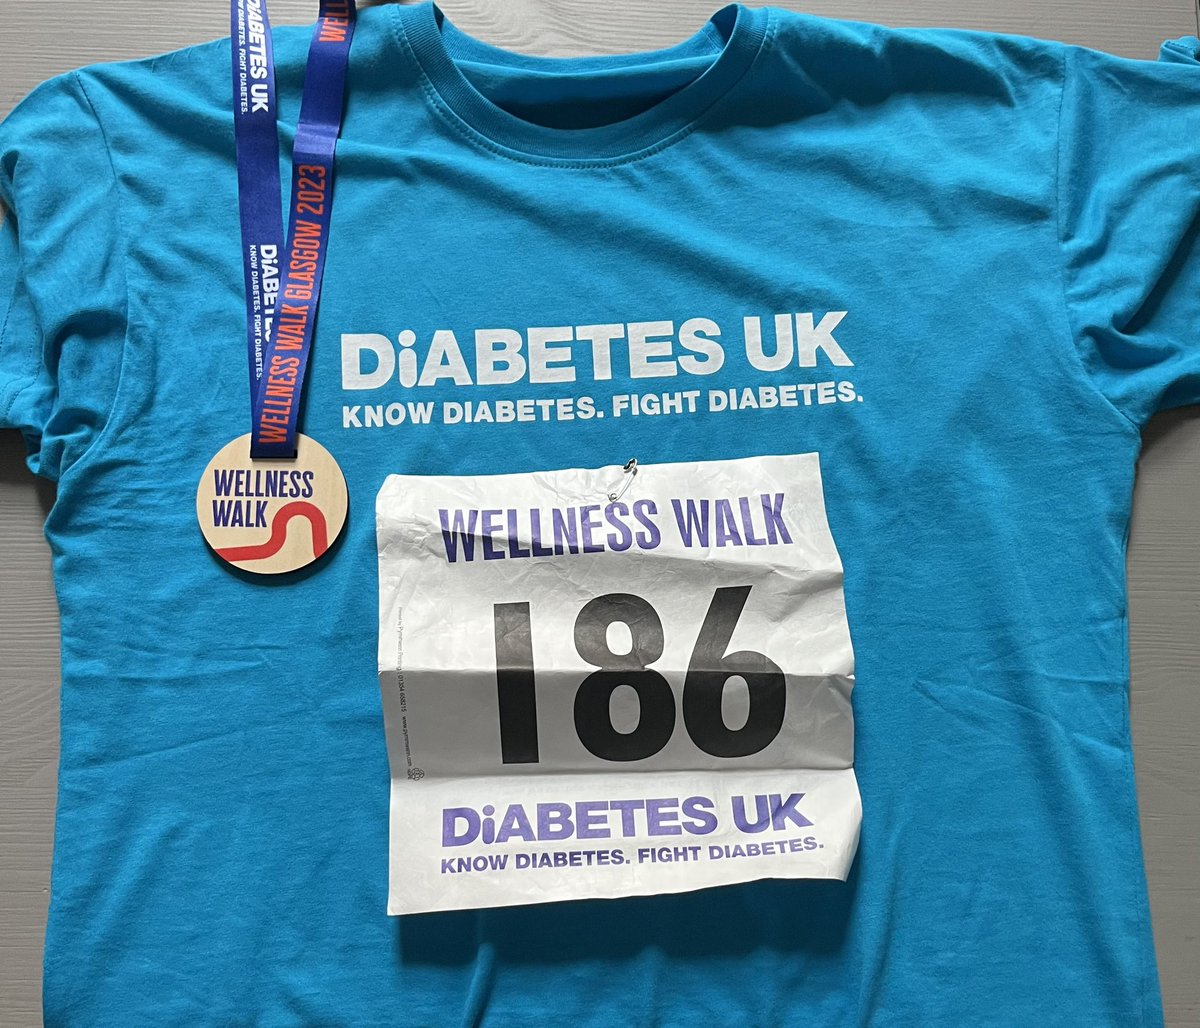 Celebrated #DiabetesWeek2023 early by joining in on the Wellness Walk in Glasgow yesterday. Walking 8 miles to help raise money for a worthy cause @DiabetesUK